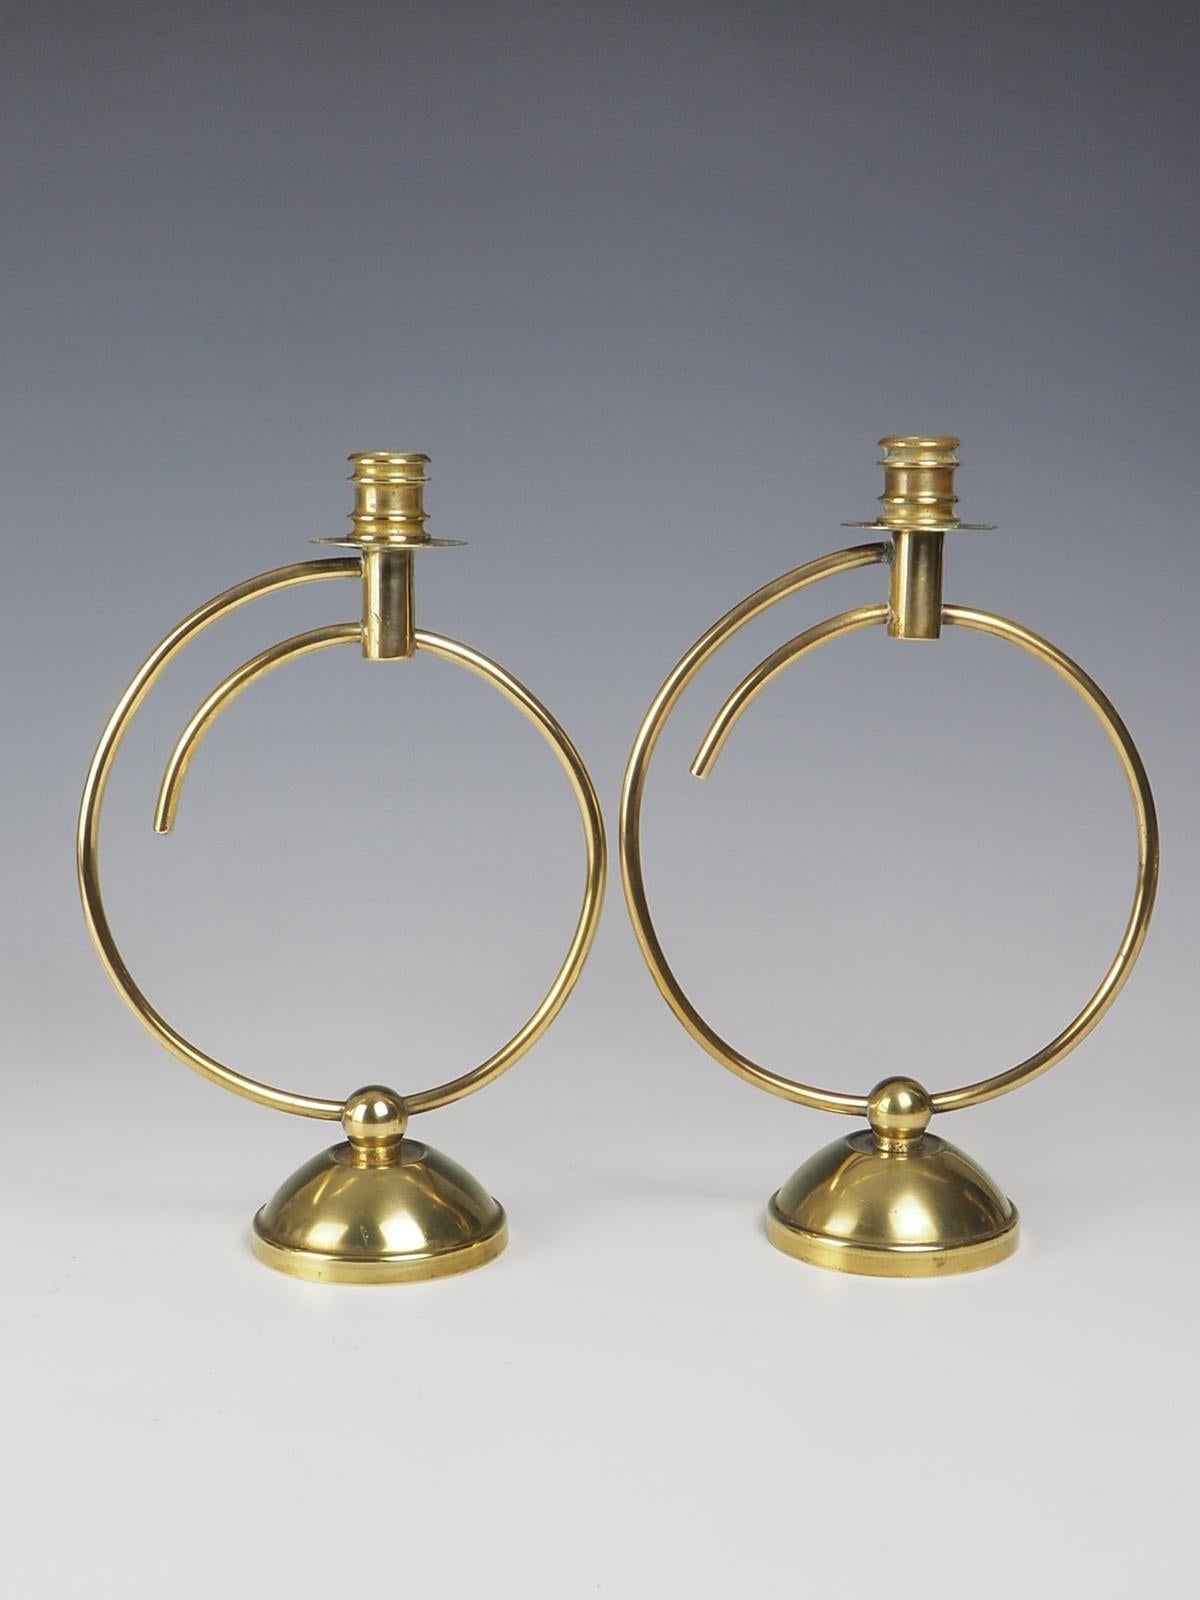 Pair of Art Deco Brass Candlesticks For Sale 2